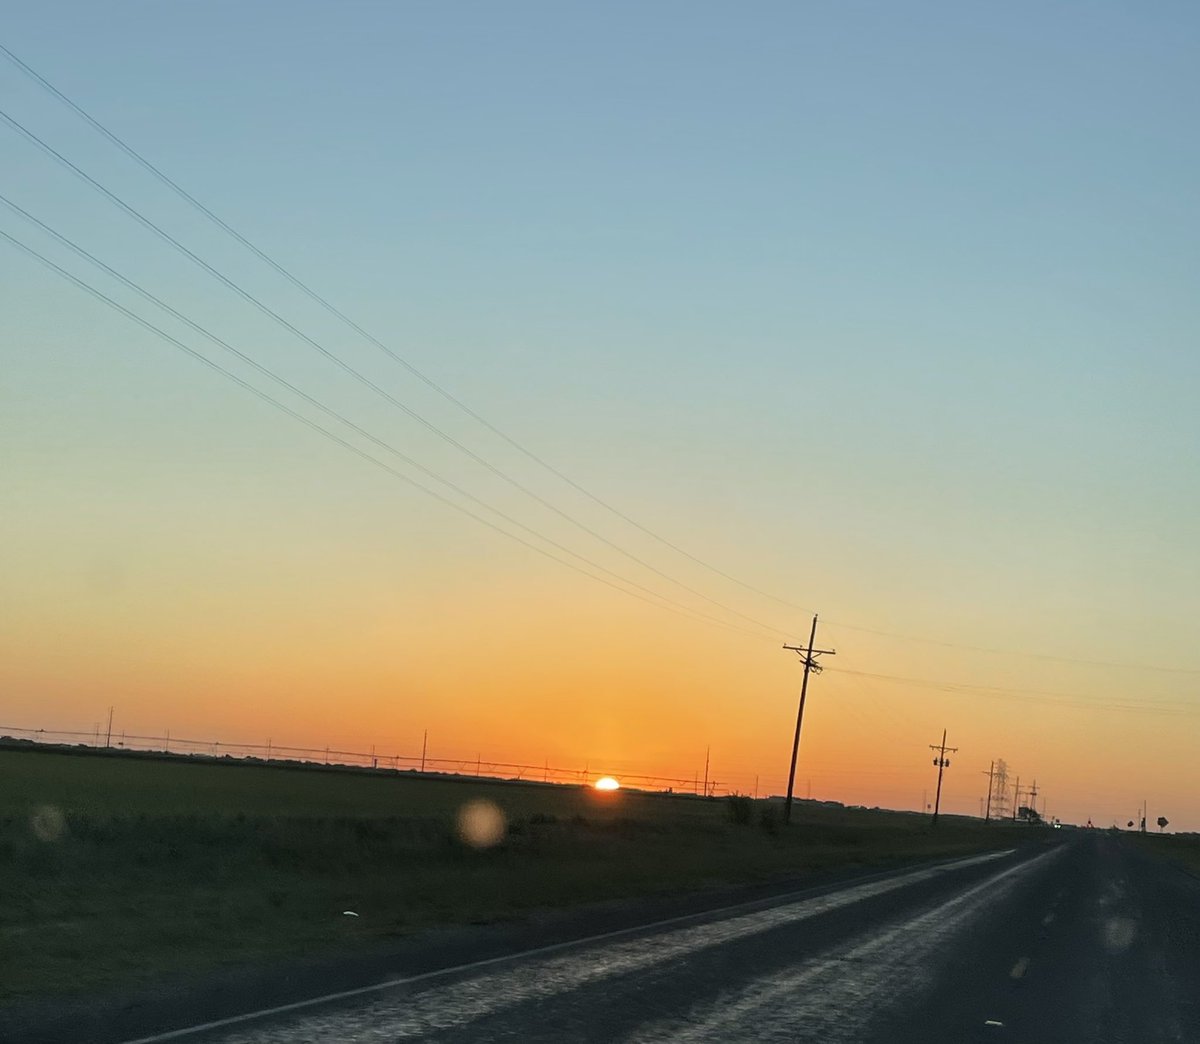 Nice West Texas #sunrise on the drive to the airport. Looks like a great day to fly.